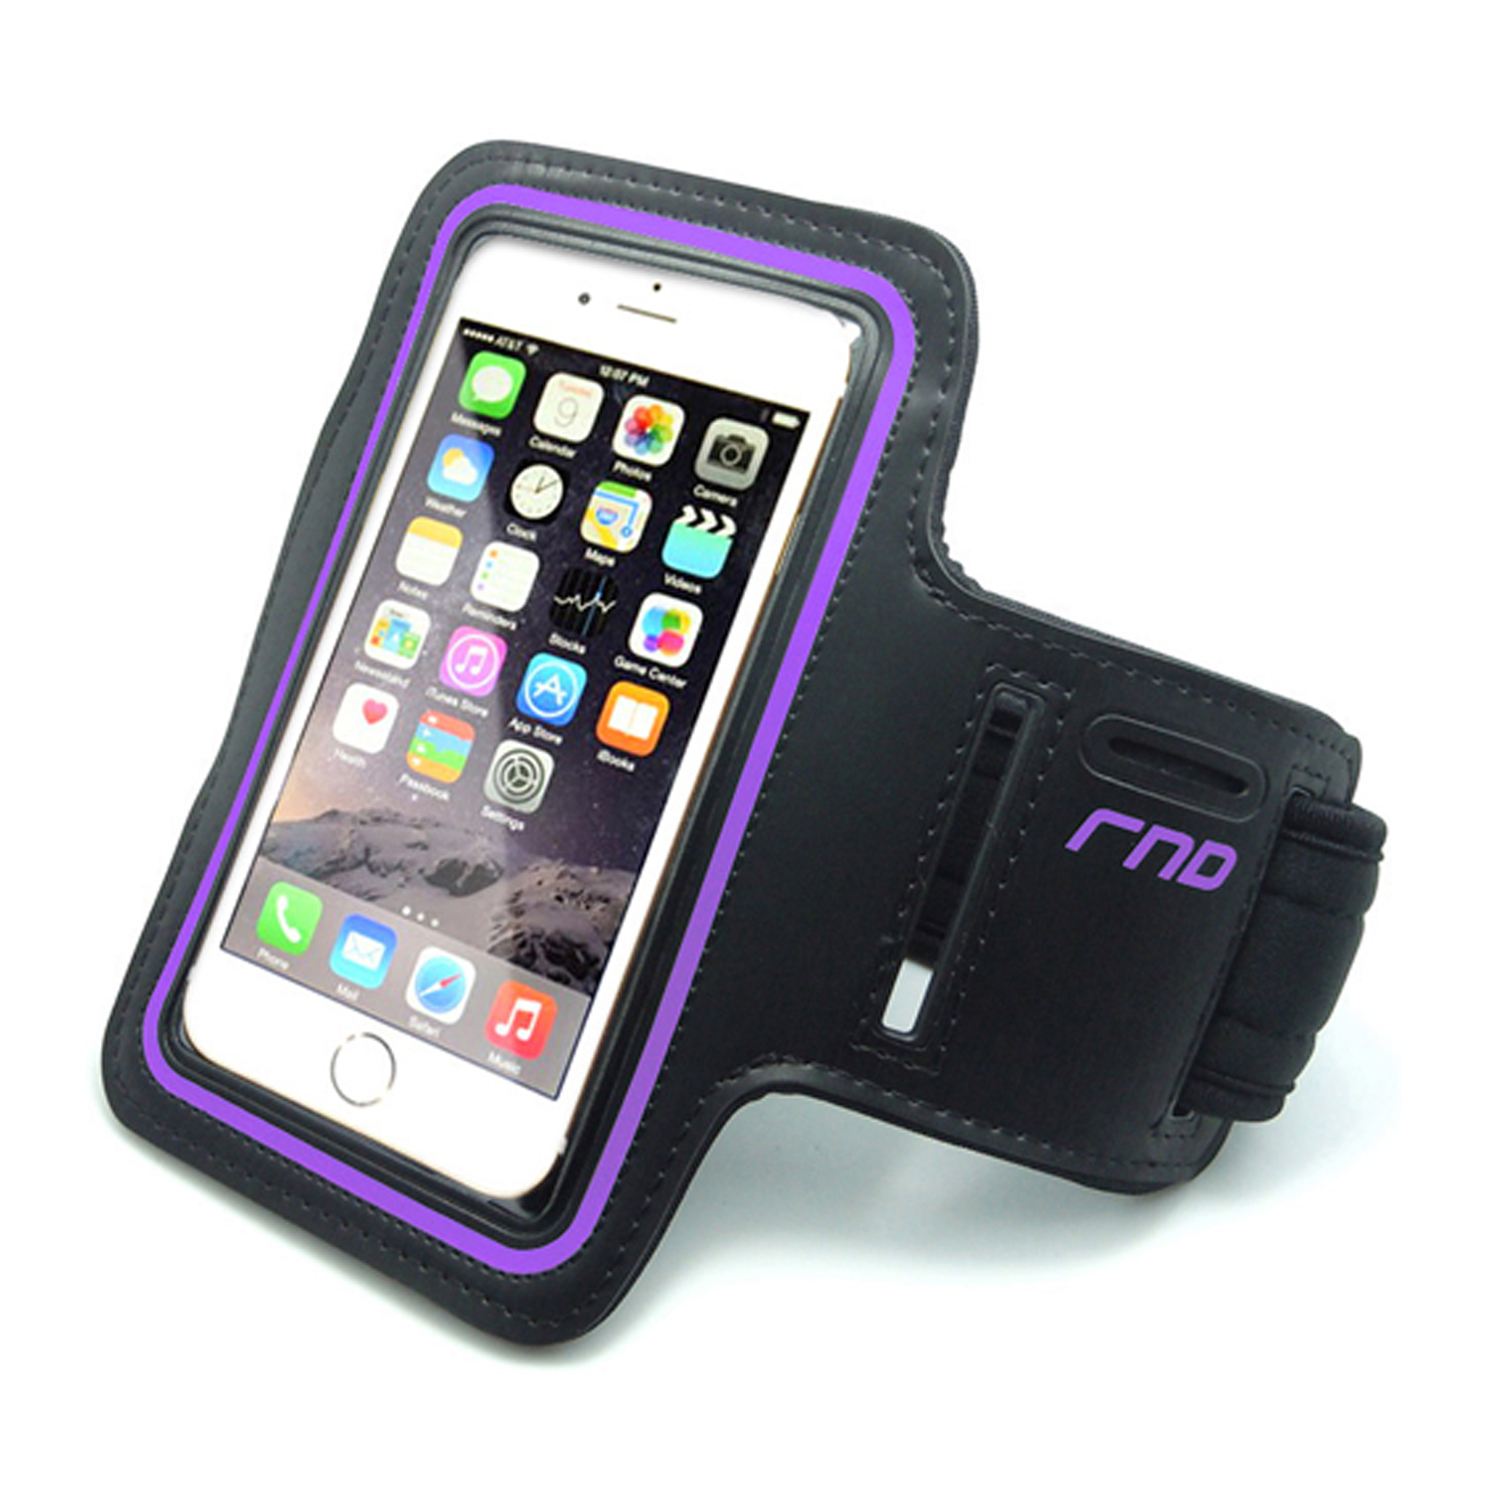 RND Slim-Fit Active Sports Armband Case for iPhone (SE, 5, 5C, 5S, 6, 6S, 7), Samsung Galaxy (S4, S5, S6, S7) LG, Moto, OnePlus, HTC, Google Pixel, Blackberry, Microsoft Smartphones and more (purple) - image 1 of 9